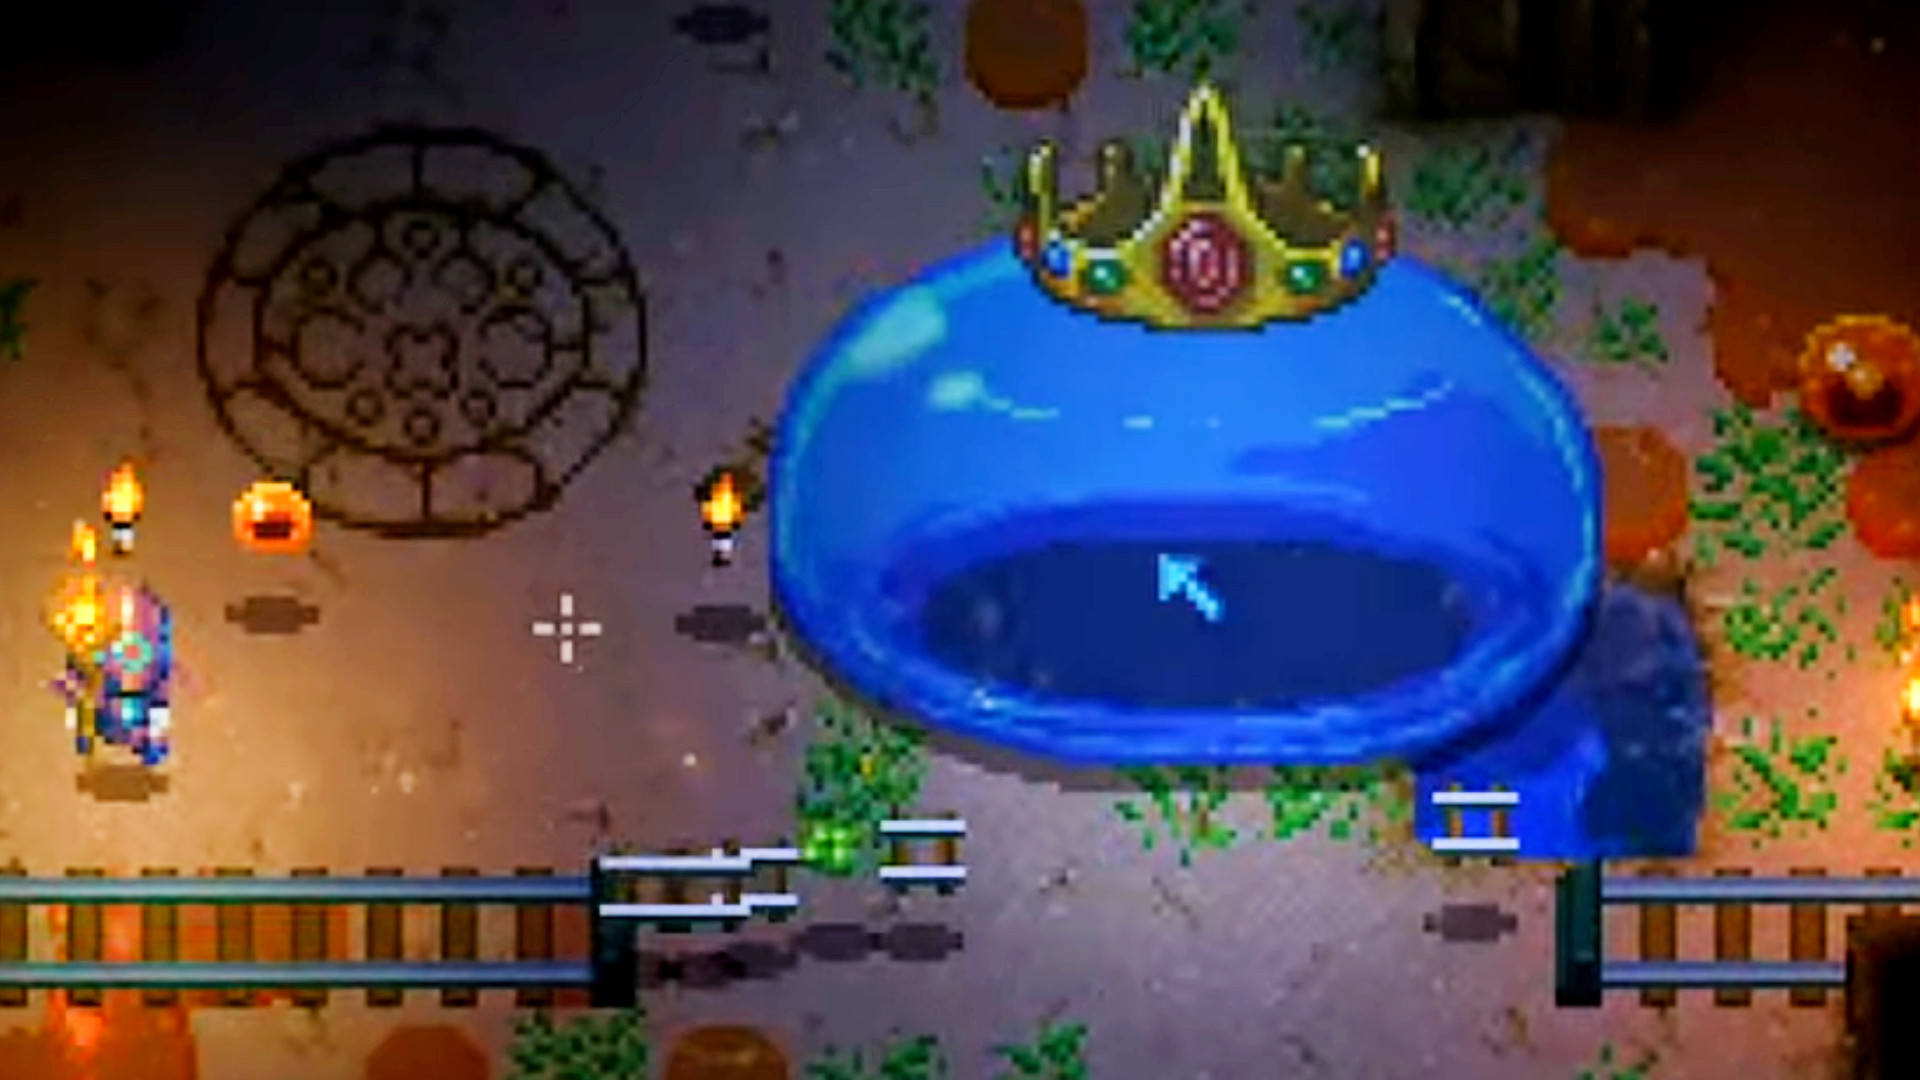 Core Keeper Terraria crossover brings King Slime to the sandbox game